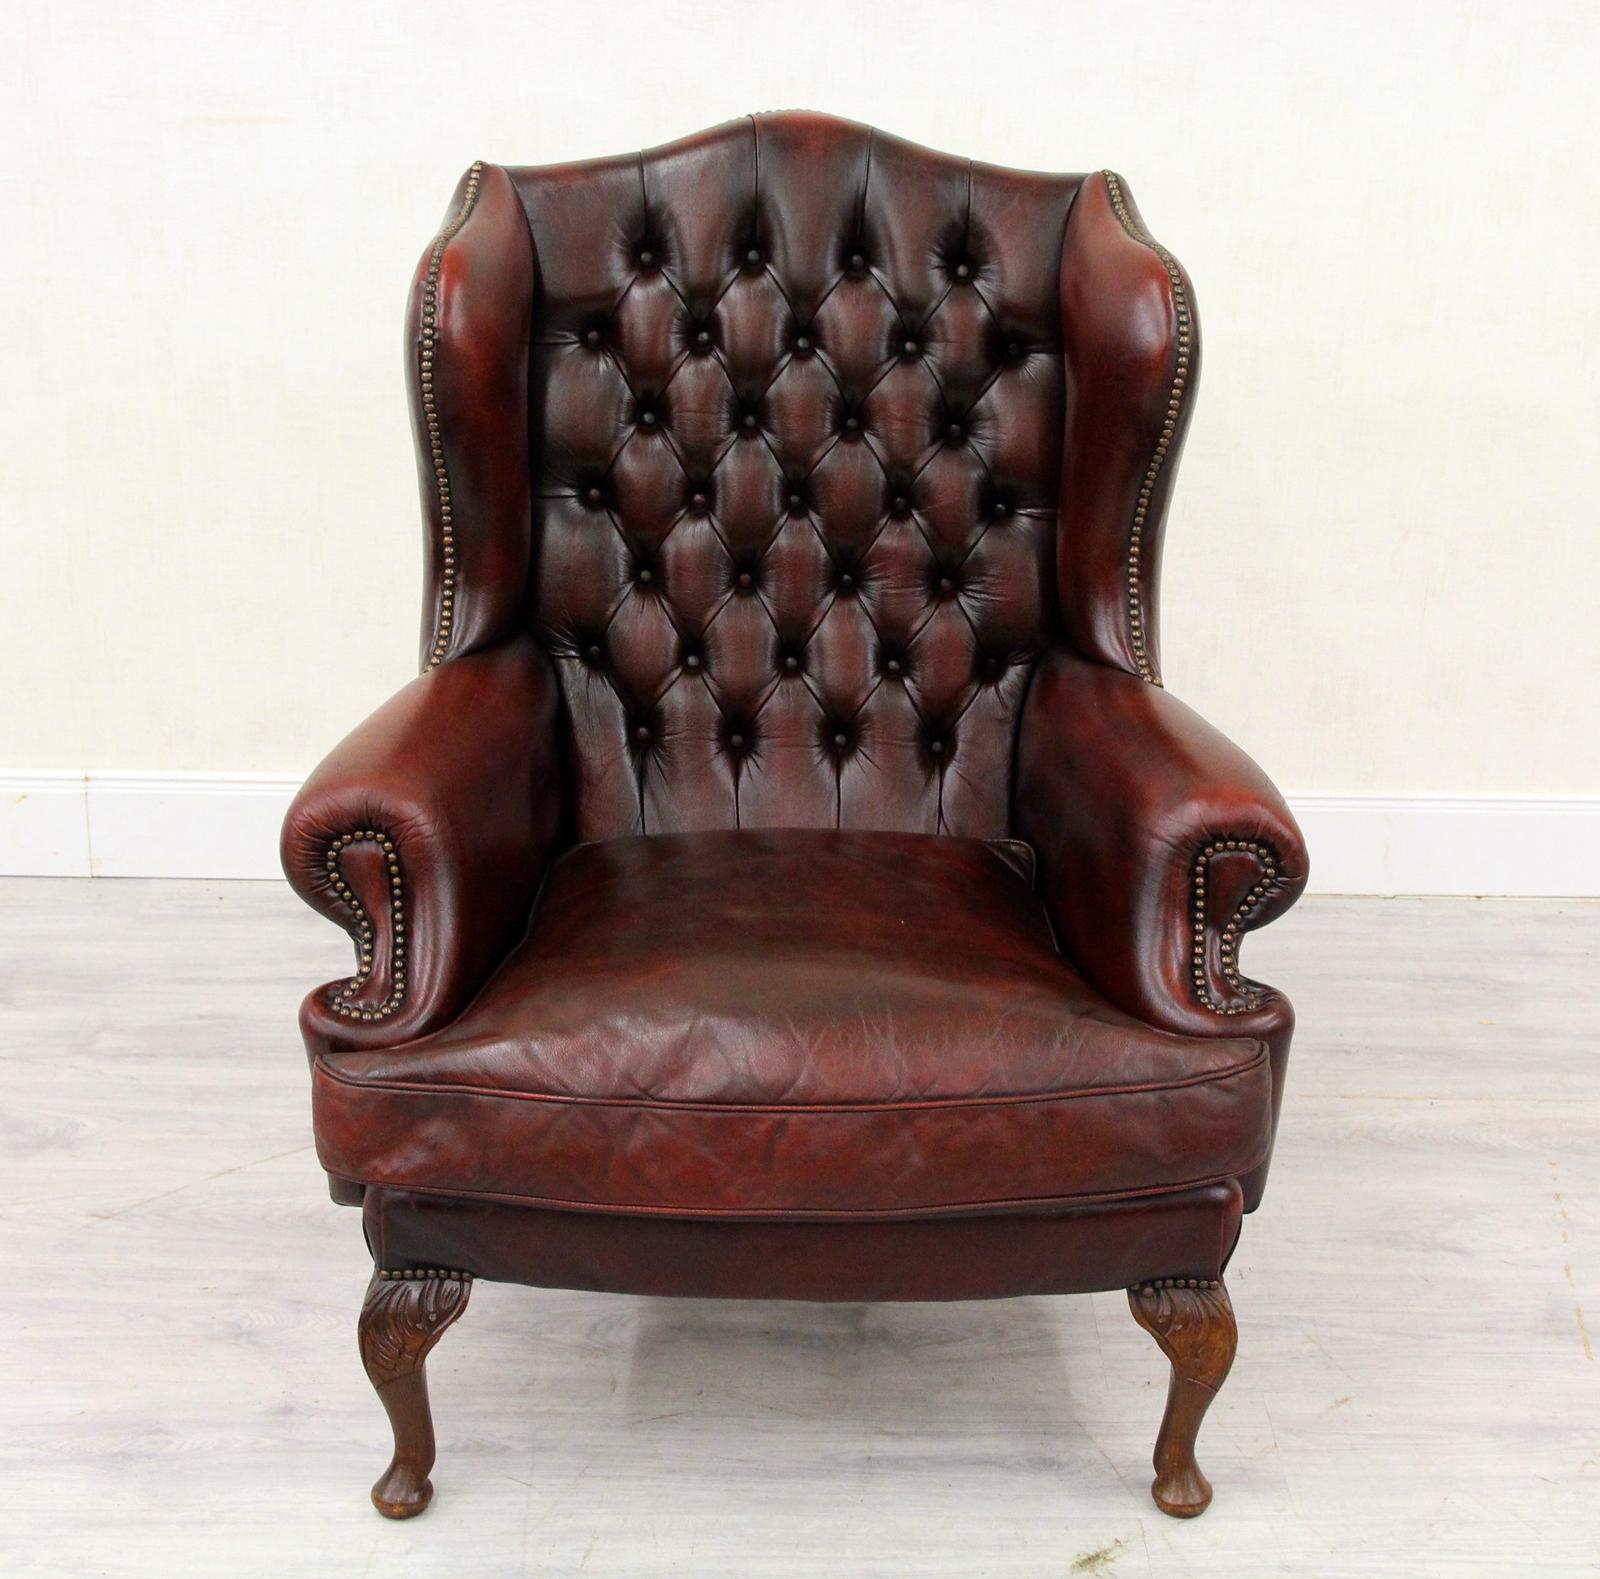 2 Chesterfield armchairs
The shape is very beautiful and extraordinary
armchair
Heightx105cm widthx80cm depthx90cm
Color: Oxblood
Condition: The armchairs are in a very good condition for the age and still have the charm of the 